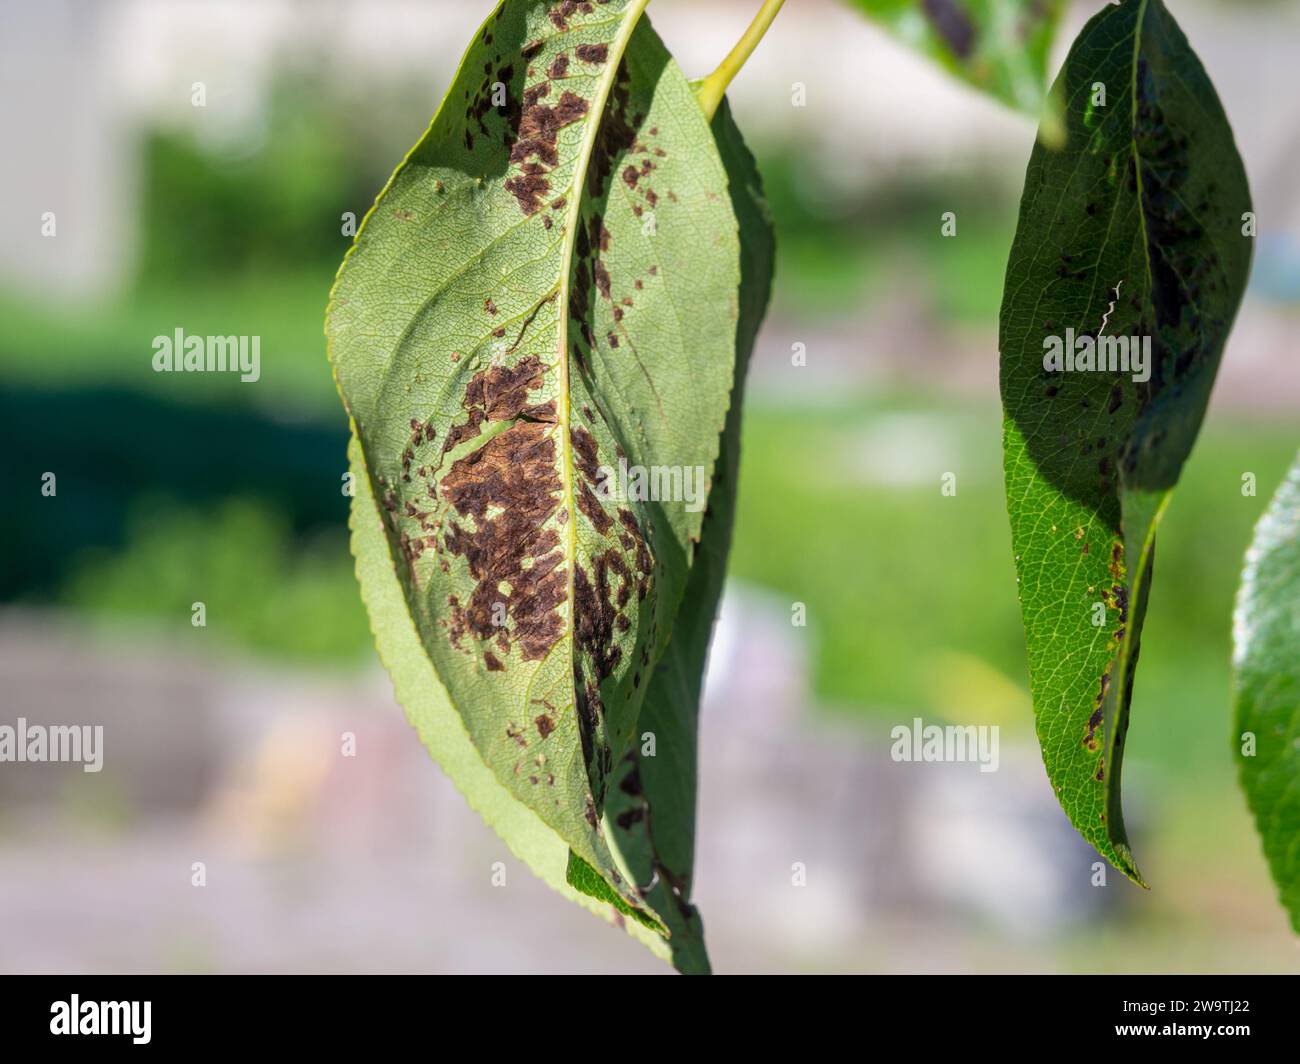 Pear leaves affected by fungal diseases Stock Photo